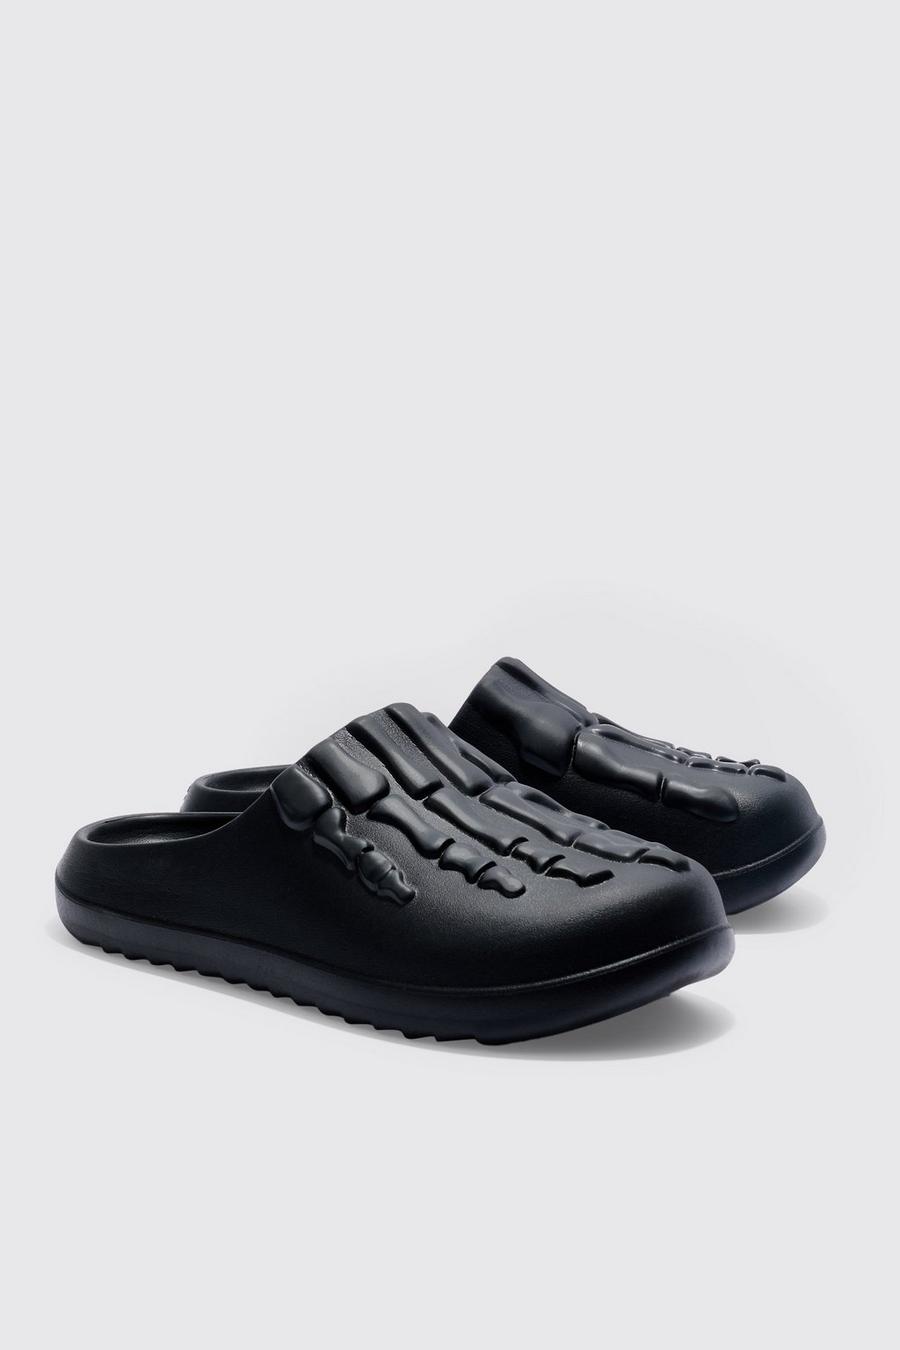 Black gucci off the grid sneaker